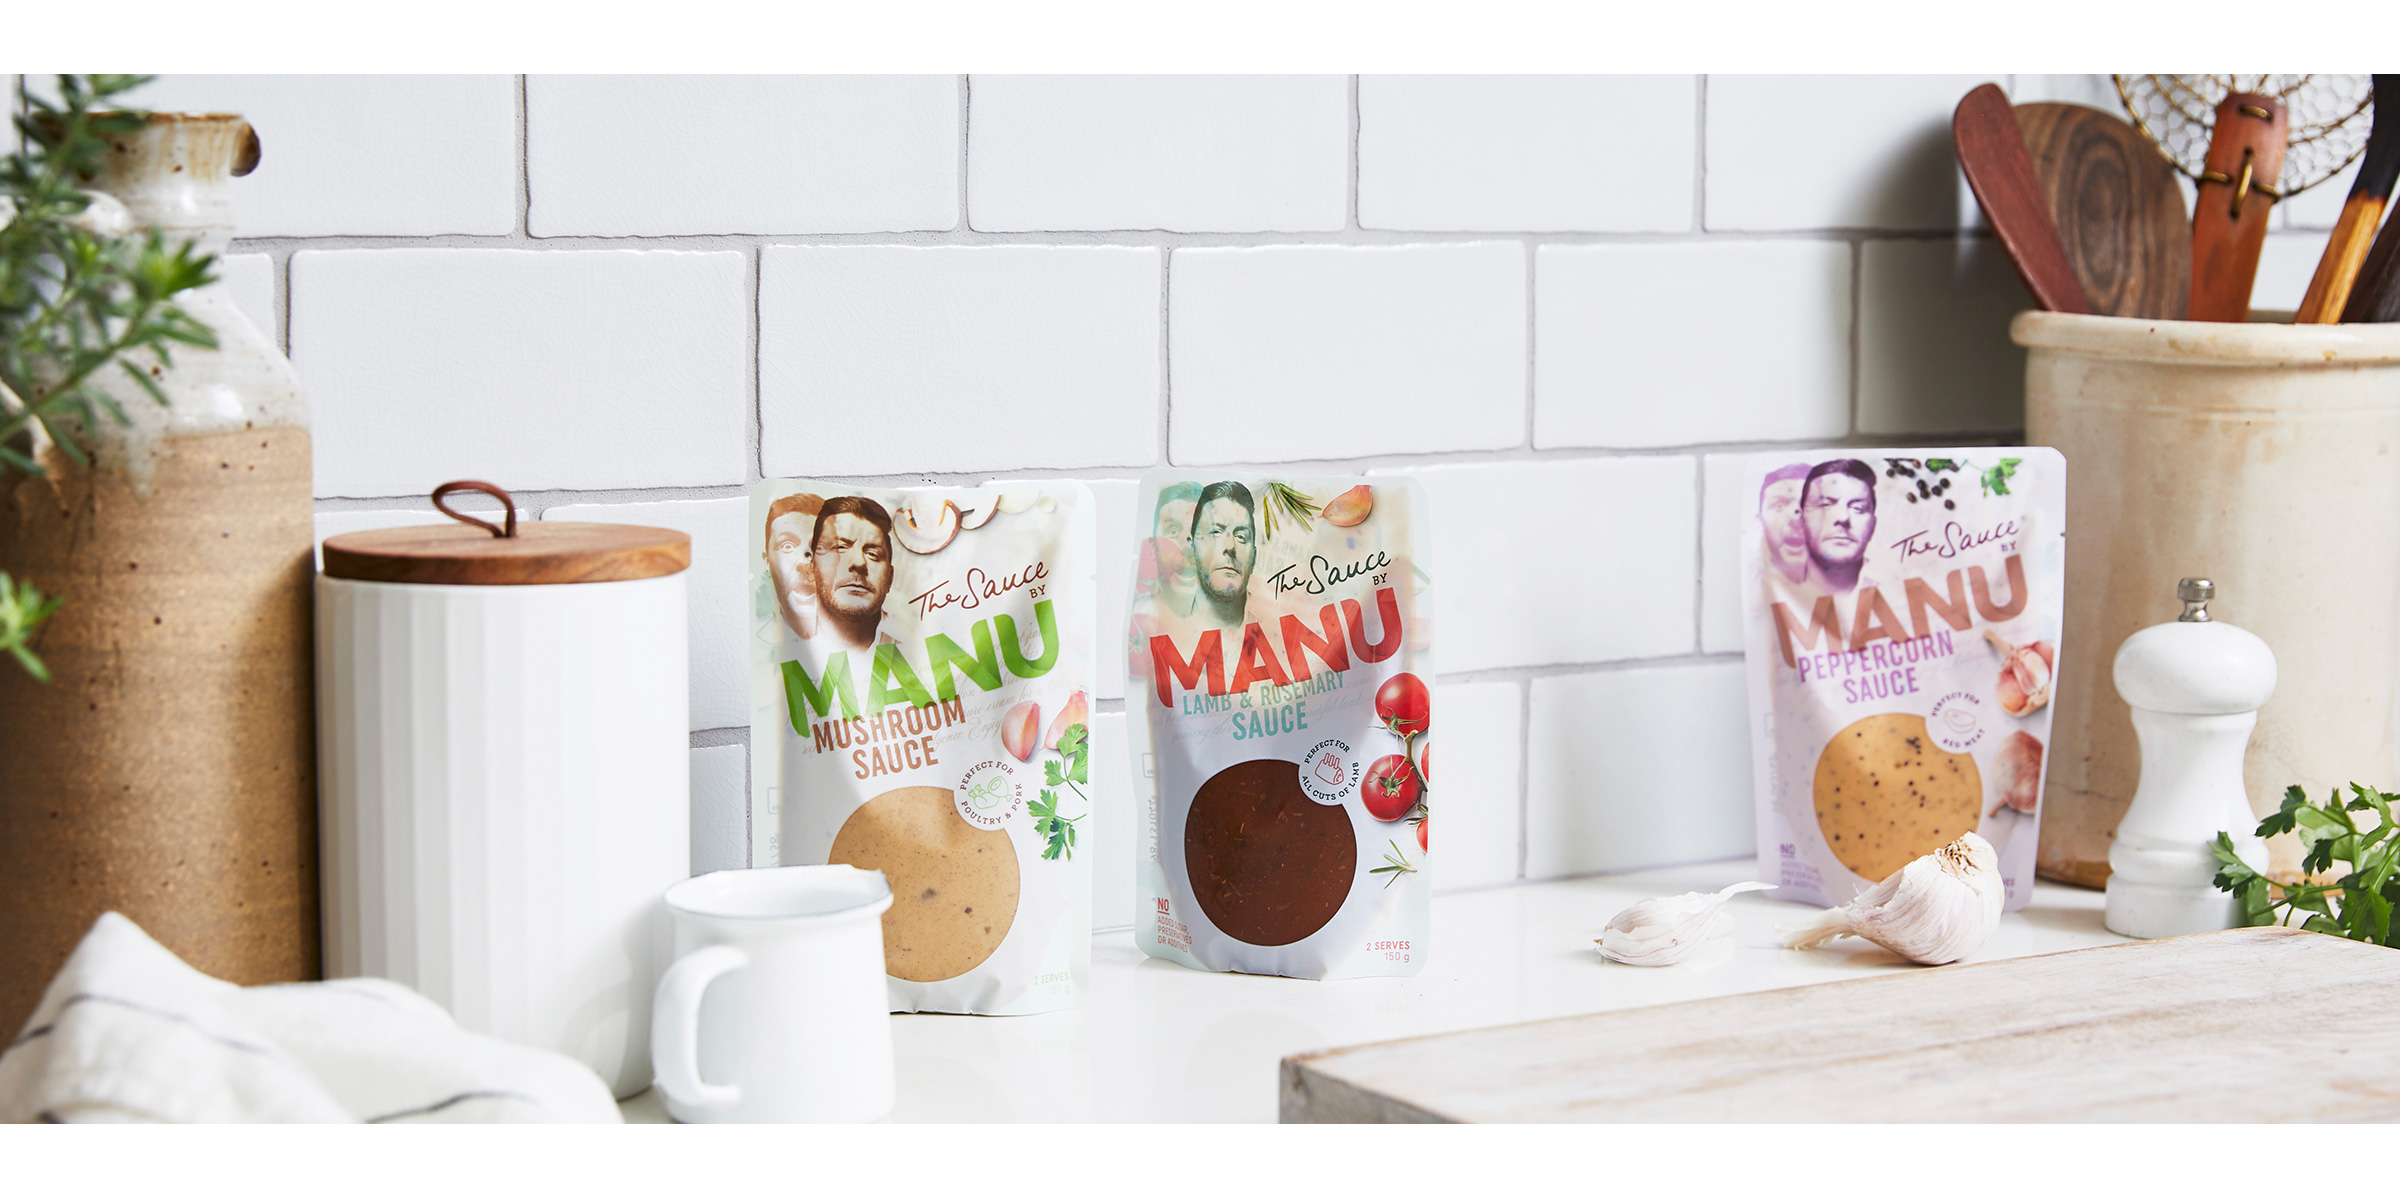 Manu-boxer-newtown-agency-design-studio-packaging-redesign-saucy